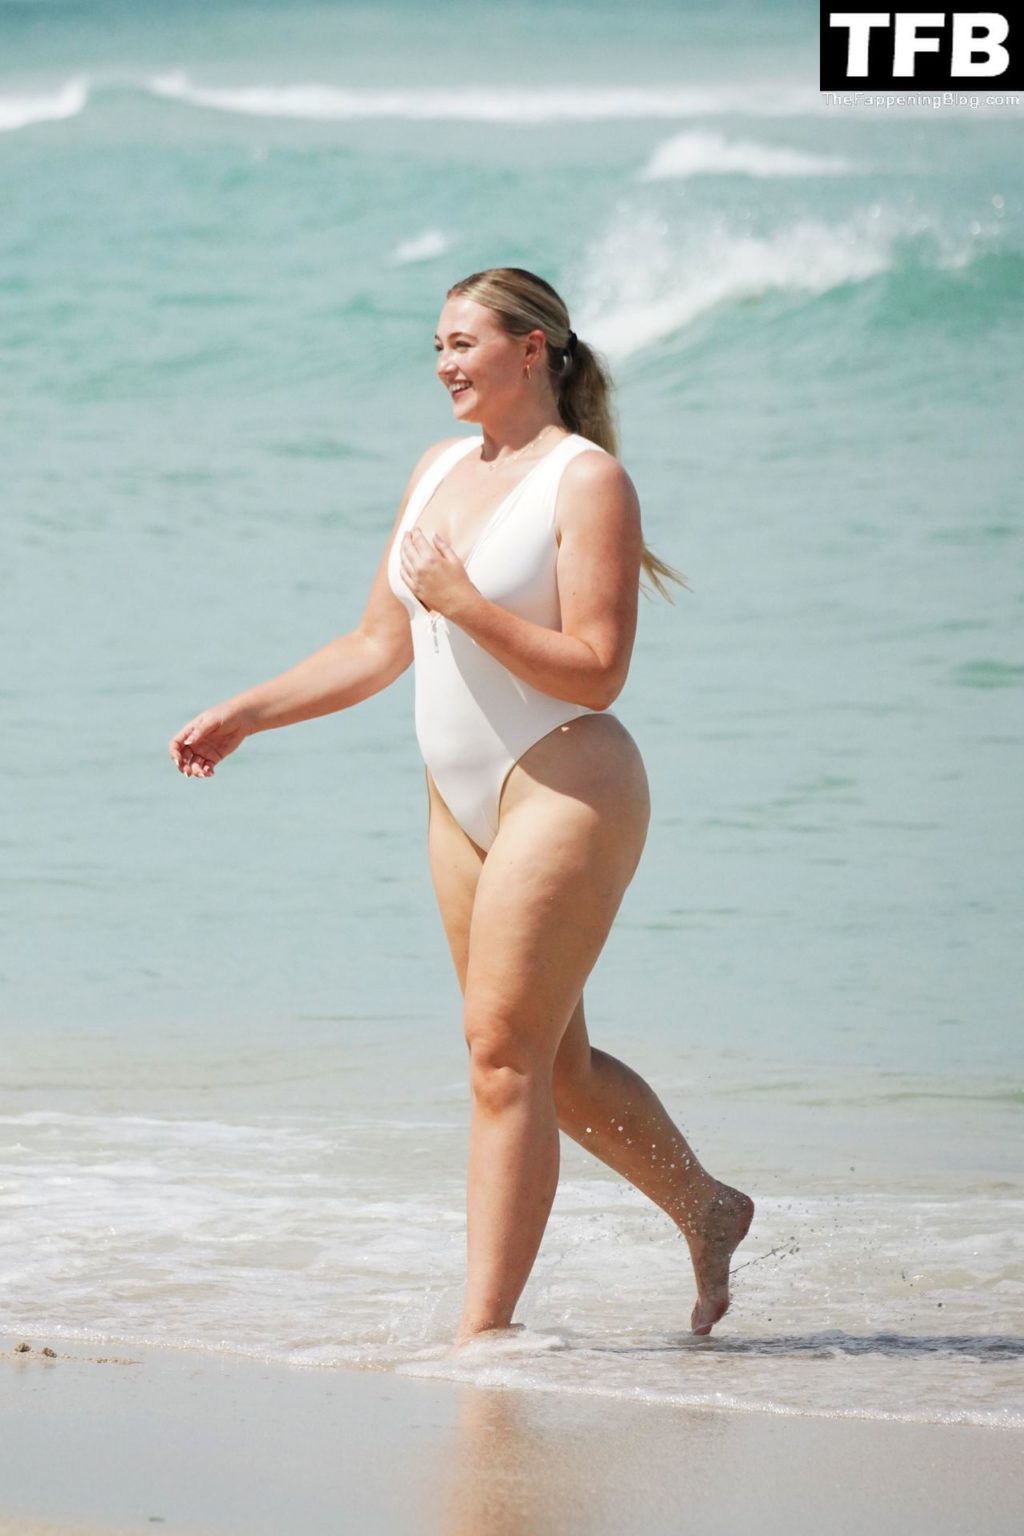 Iskra Lawrence Sexy The Fappening Blog 4 1024x1536 - Iskra Lawrence Displays Her Curves on the Beach in Miami (21 Photos)